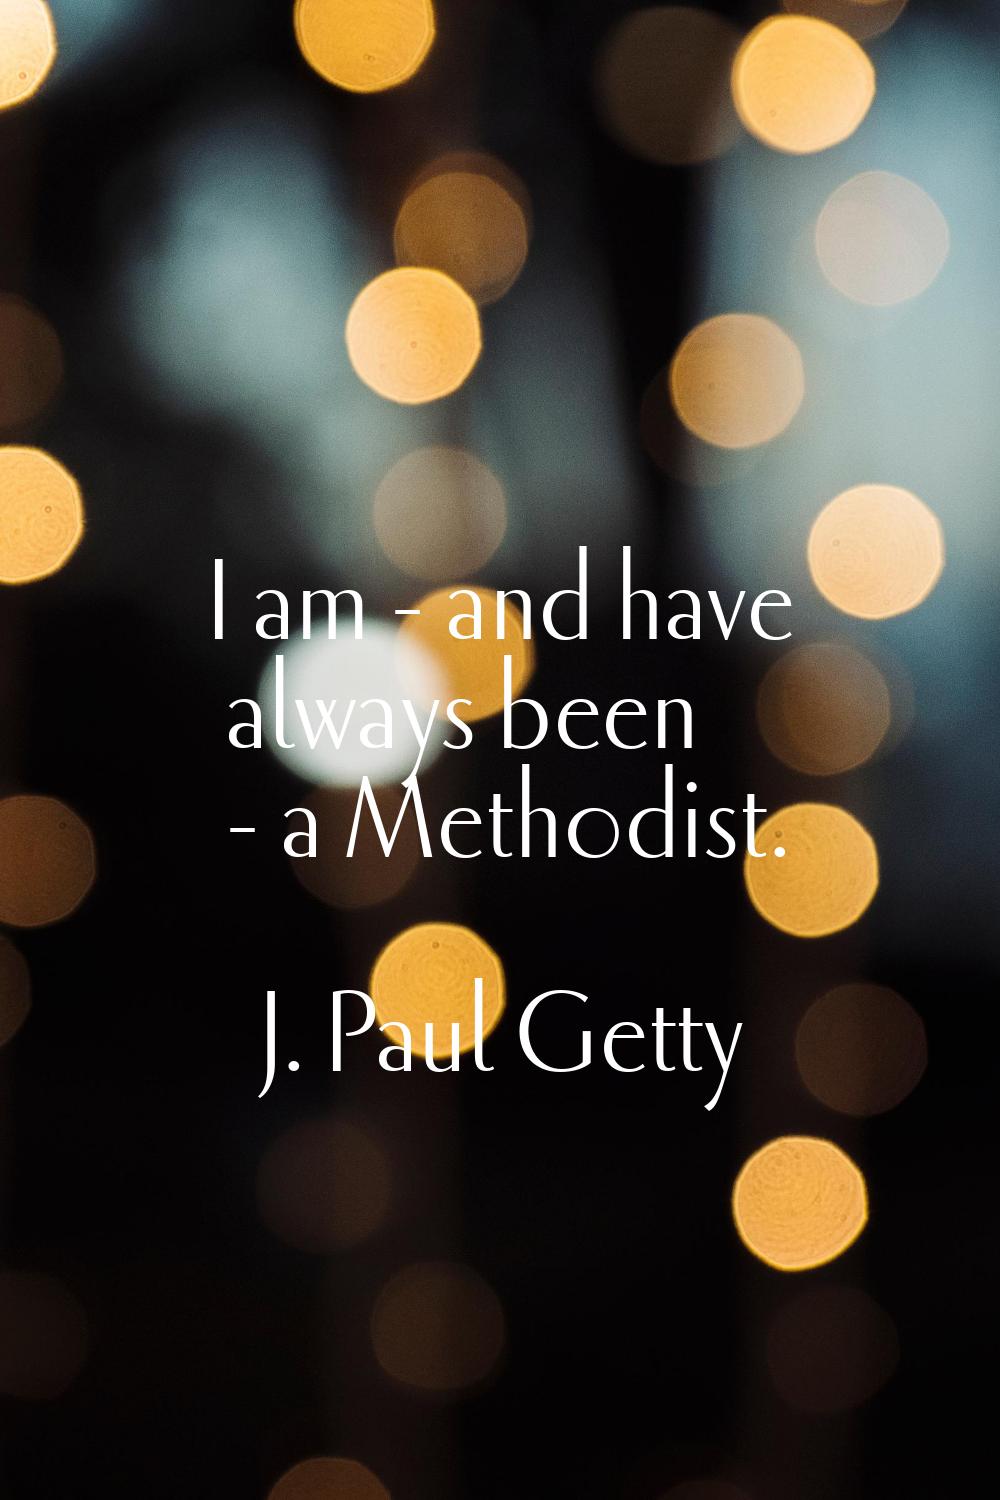 I am - and have always been - a Methodist.